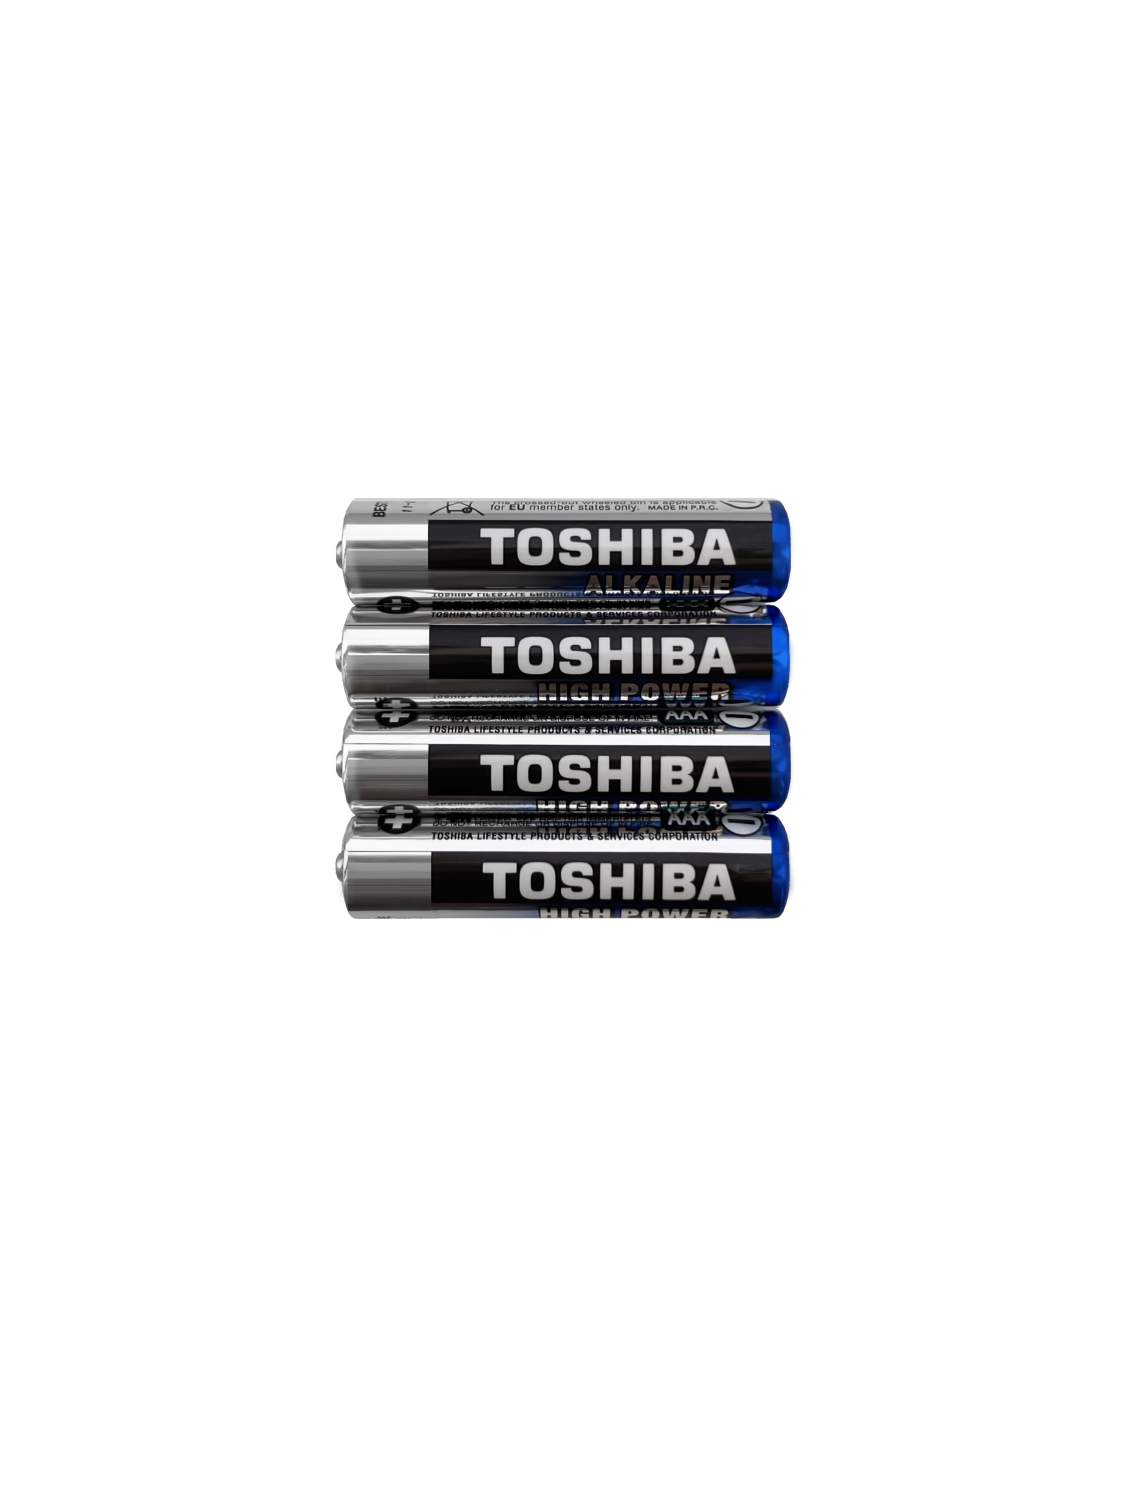 LR41 Toshiba Lifestyle Products, Battery Products